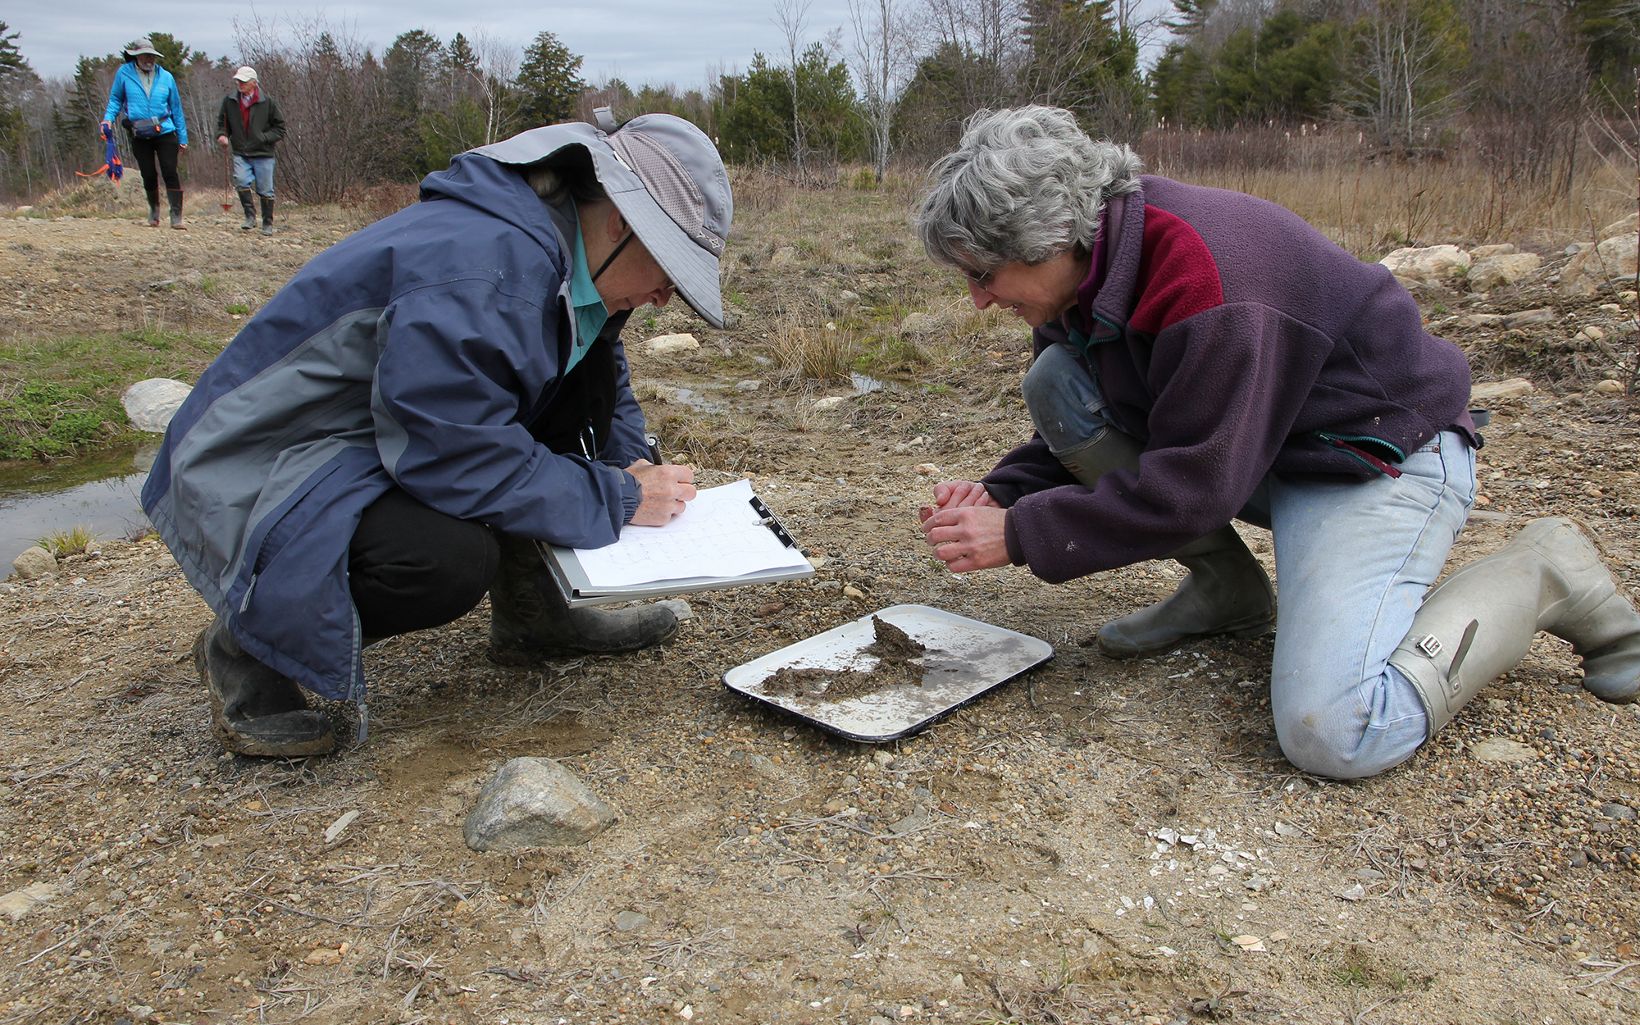 Two women kneel over a tray of soil. One of them digs through while the other takes notes.